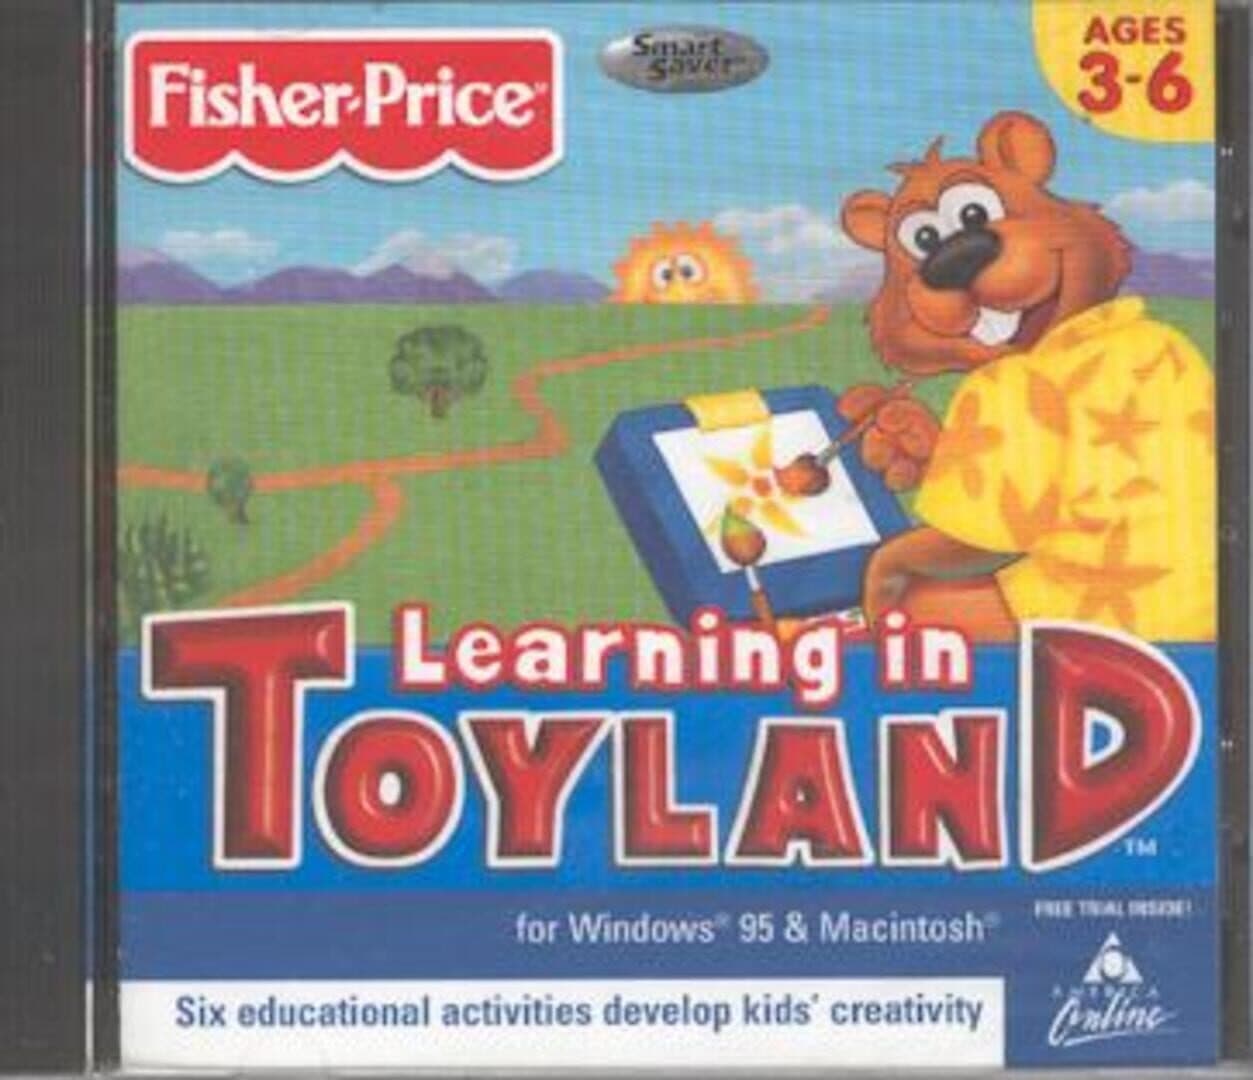 Fisher-Price: Learning in Toyland cover art